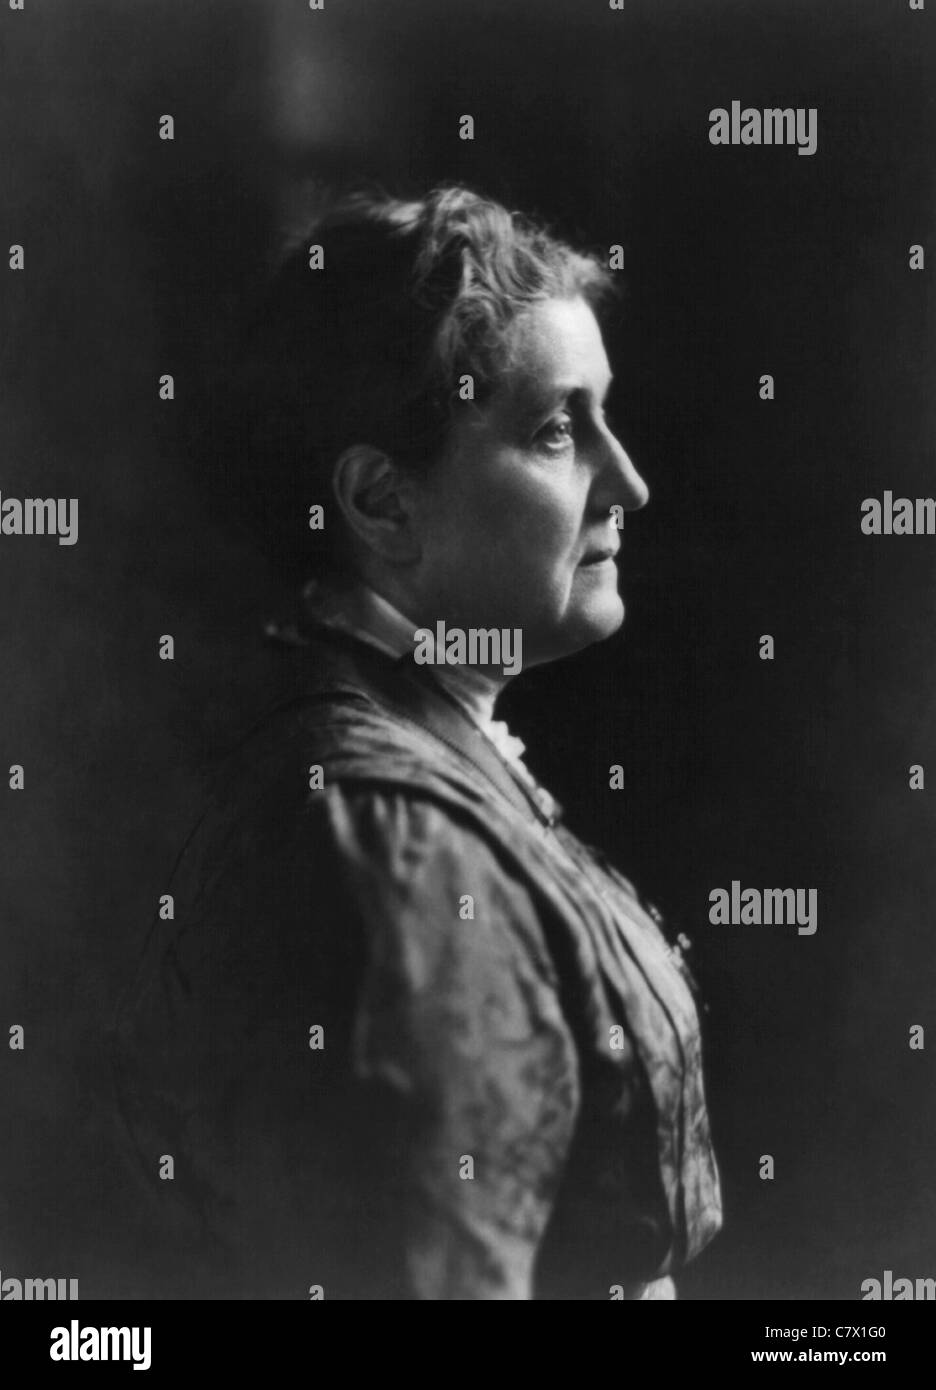 American social reformer, activist and pacifist Jane Addams (1860 - 1935) - co-winner of the Nobel Peace Prize in 1931. Stock Photo